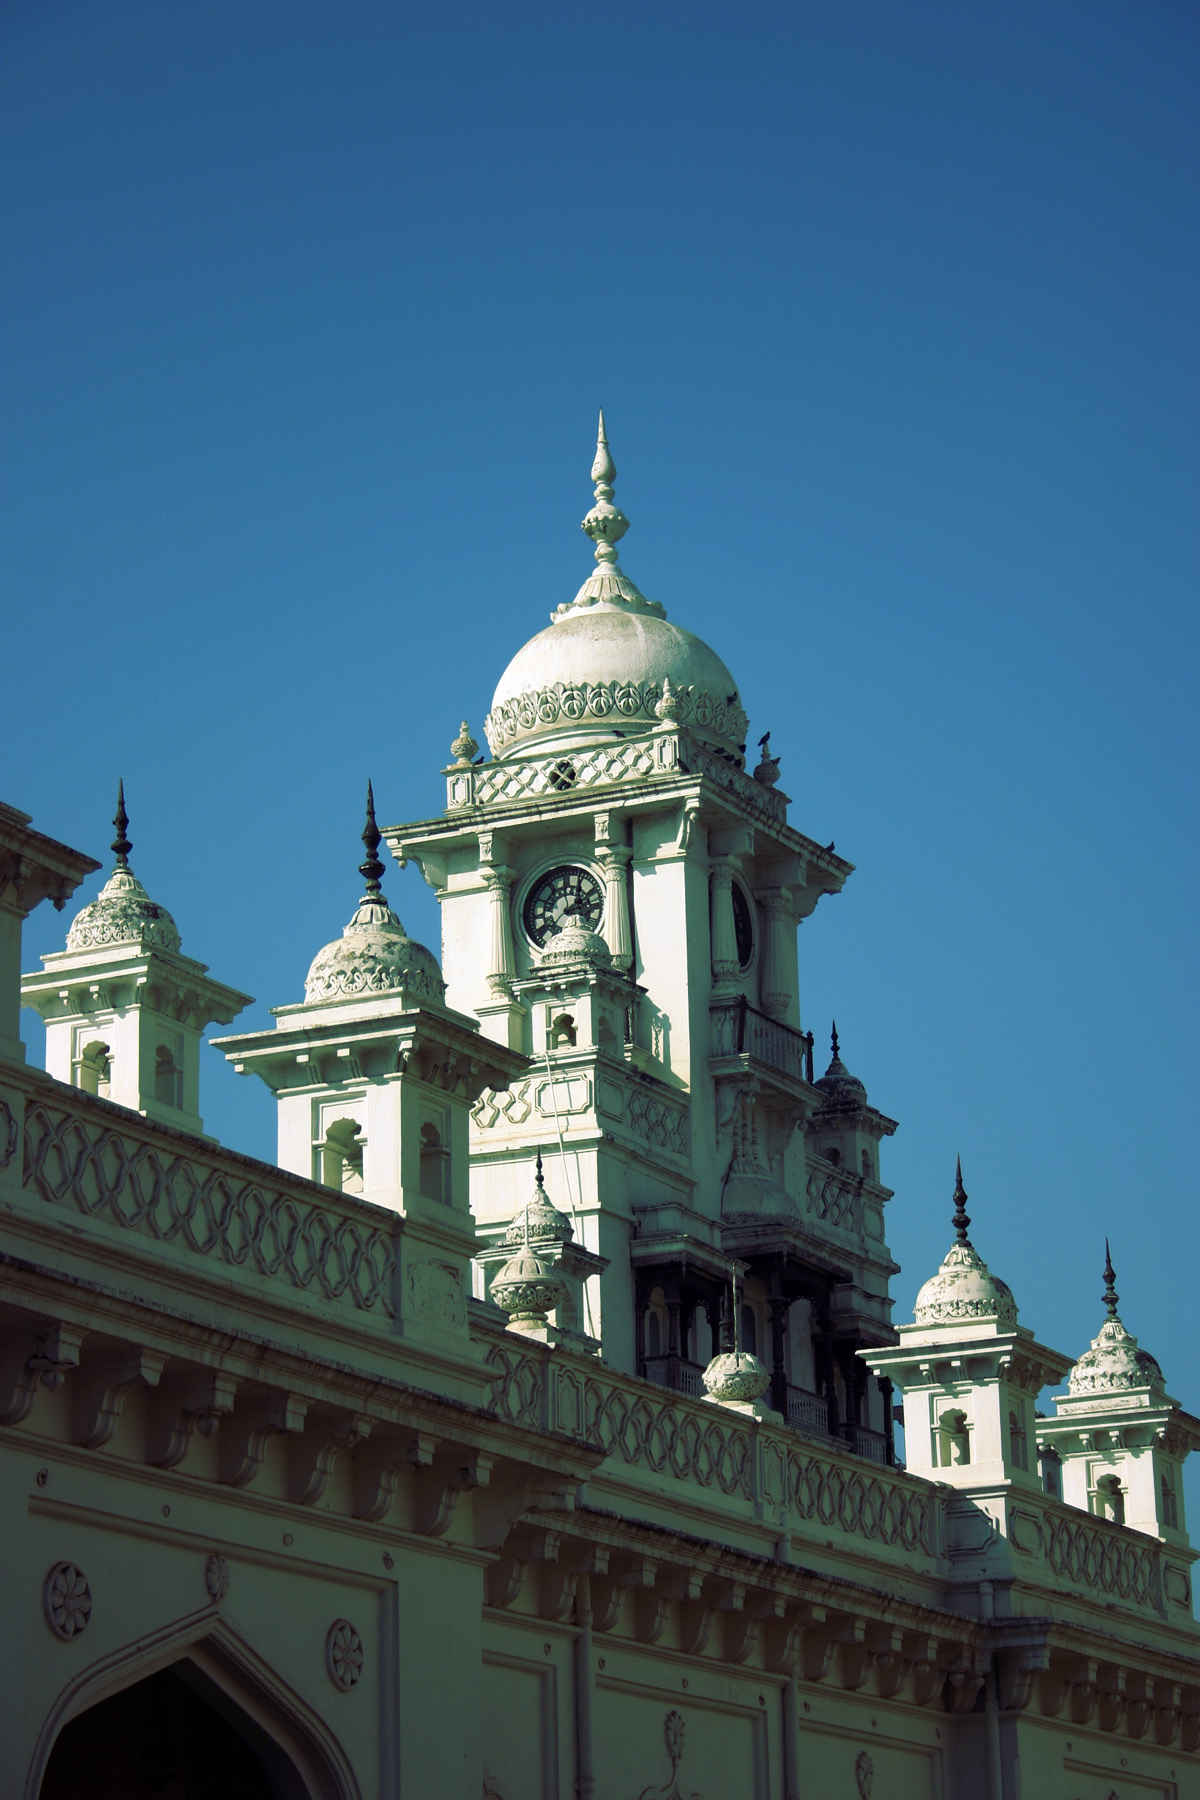 khilwat_palace_located_in_Old_hyderabad_city_a_nizam's_palace_6.jpg